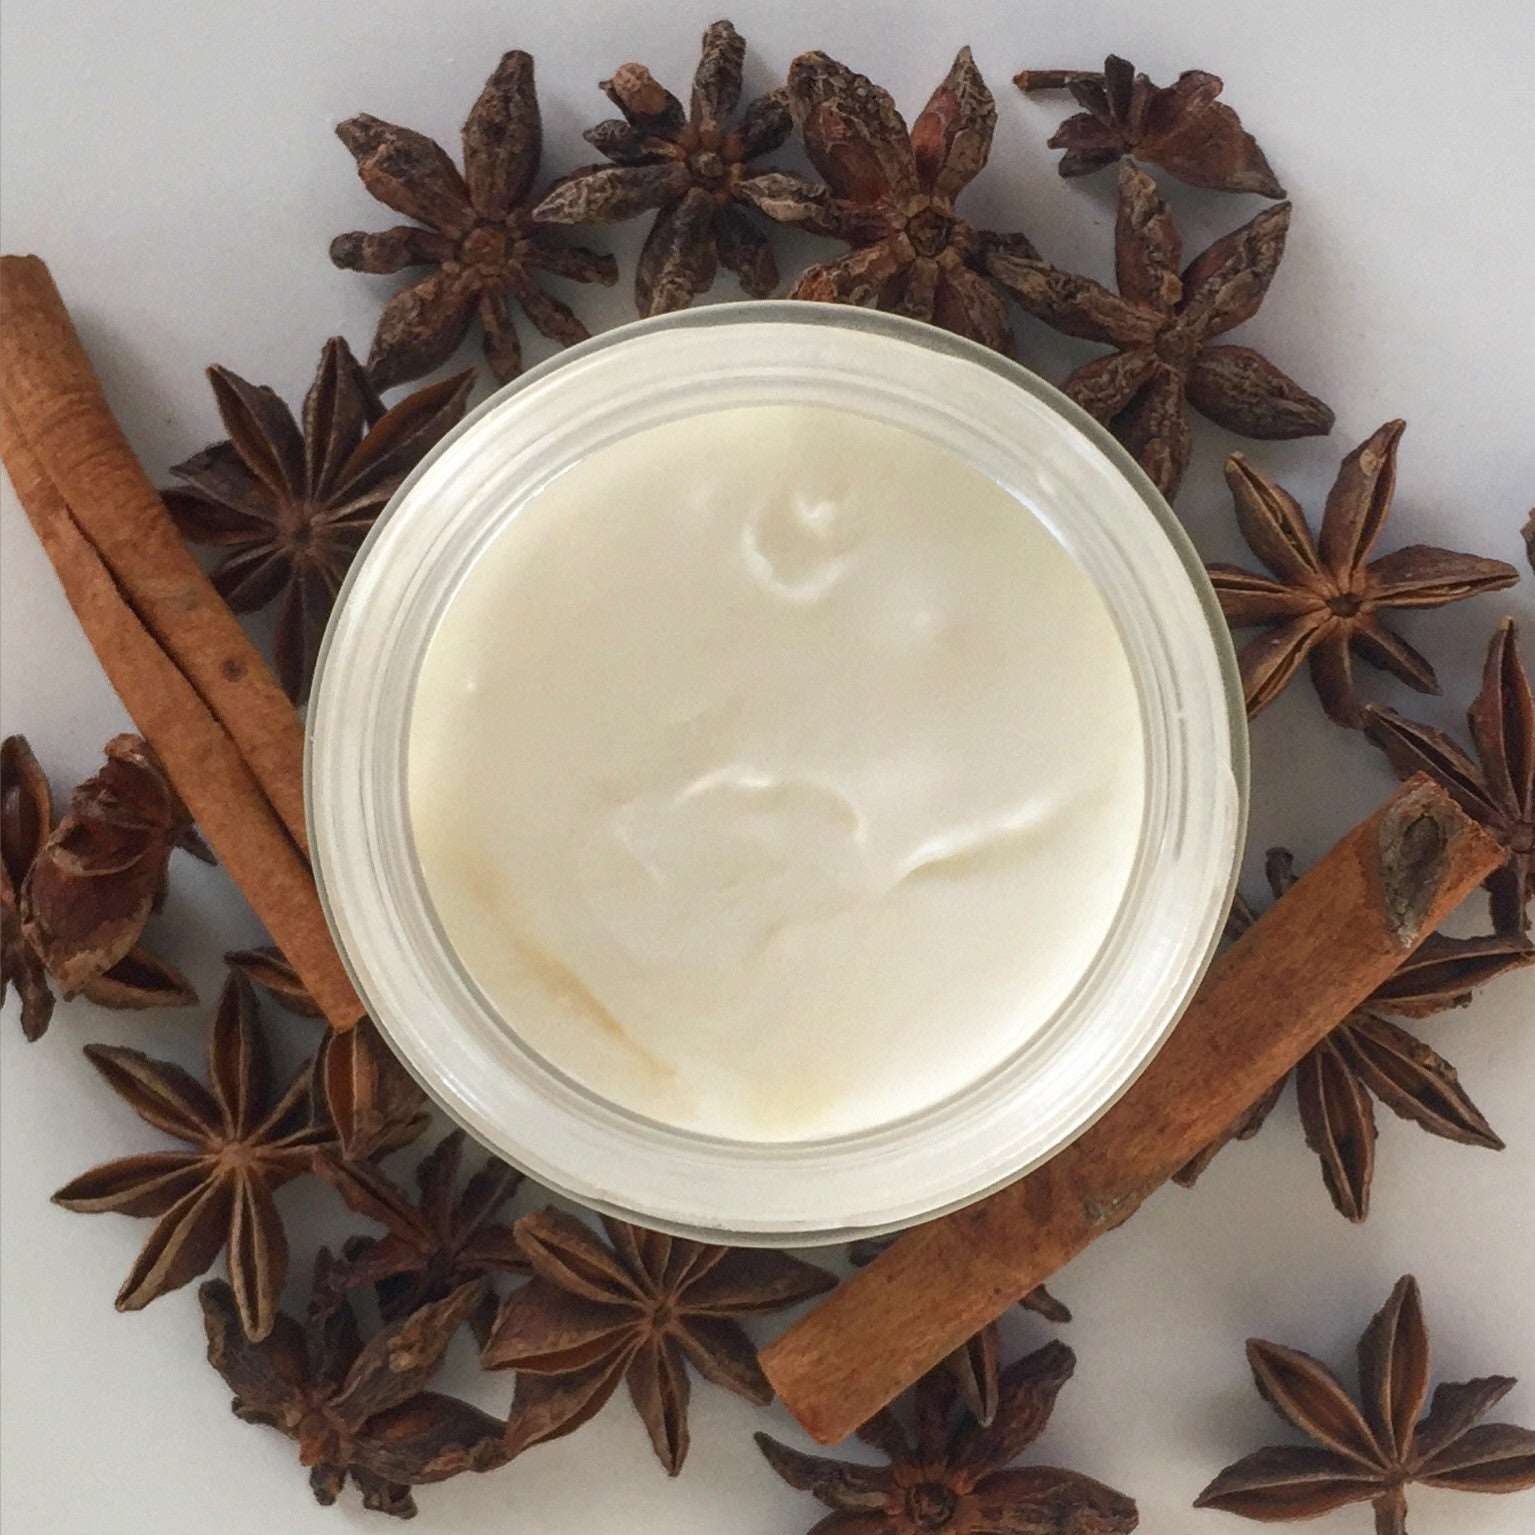 Our natural handmade Spicy Chai body butter makes skin silky soft! It is made of top quality raw ingredients from around the world making it completely unique and high grade. It moisturizes, nourishes and regenerates your skin to promote a healthy and radiant glow!